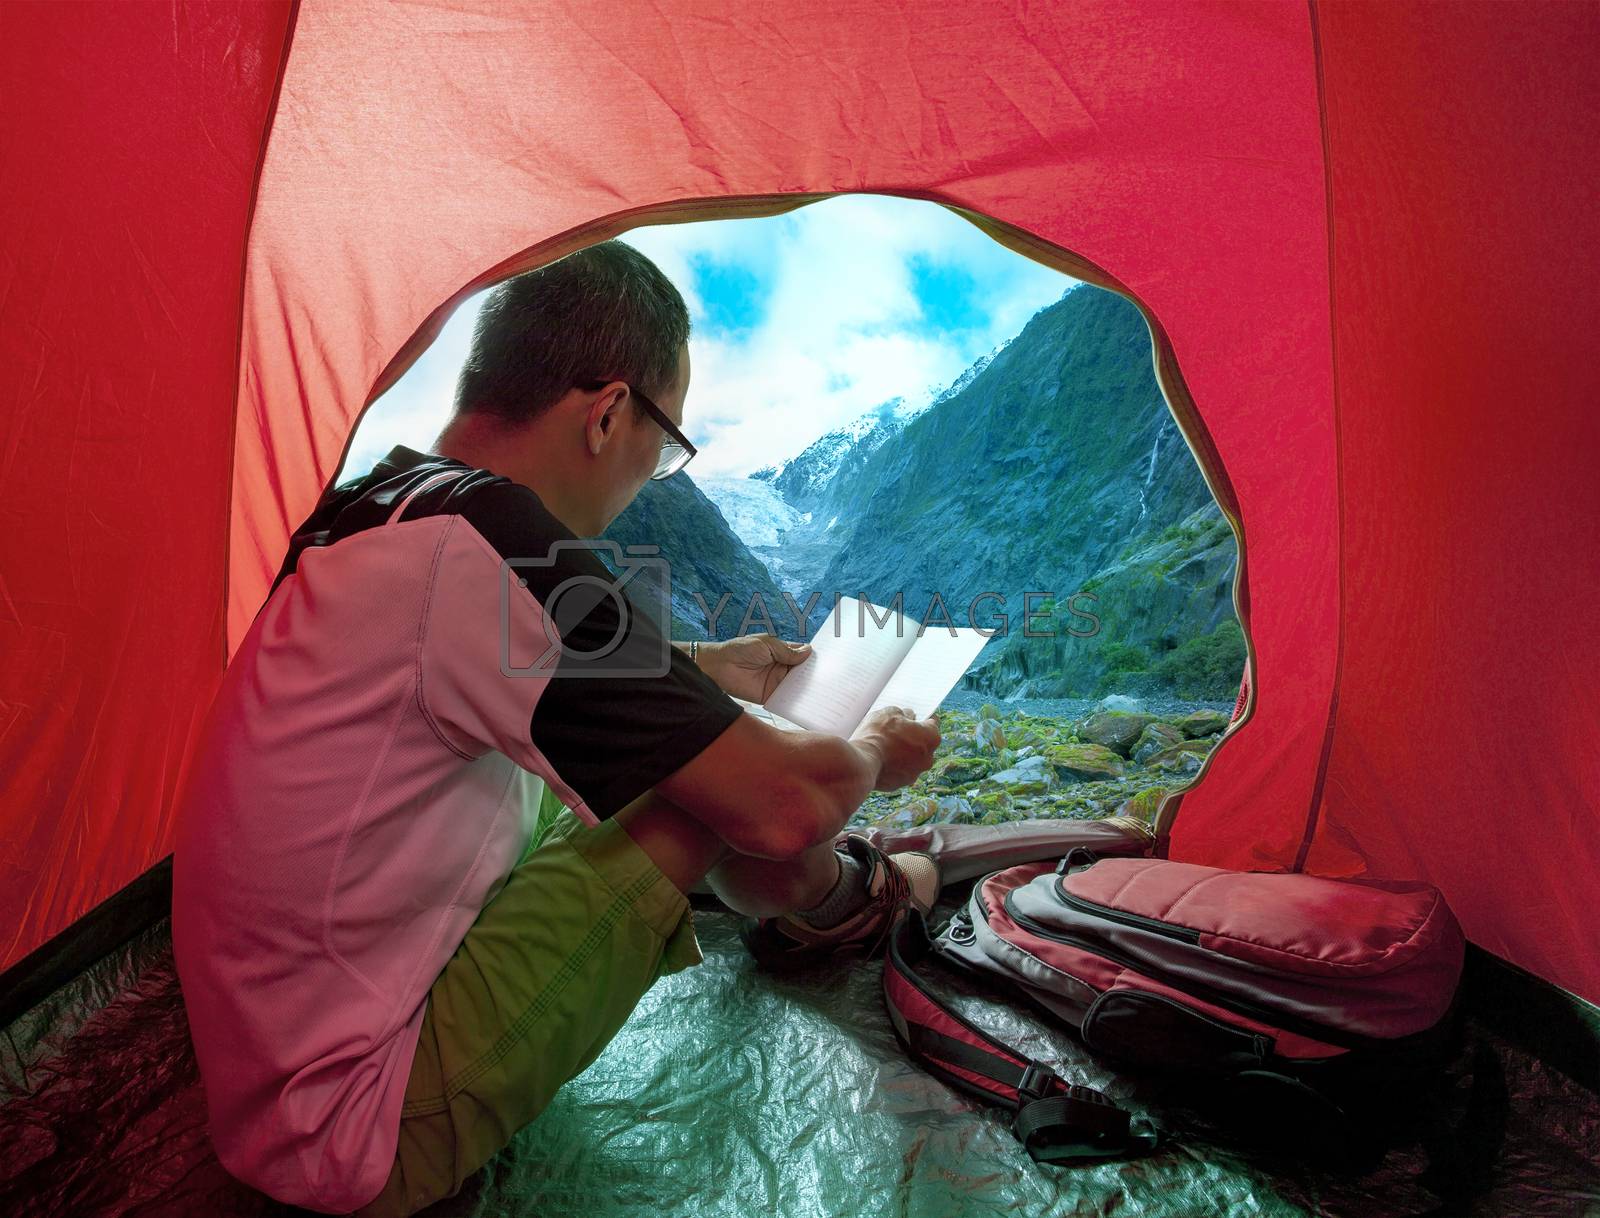 Royalty free image of camping man reading a traveling guild book in camp tent beautifu by khunaspix